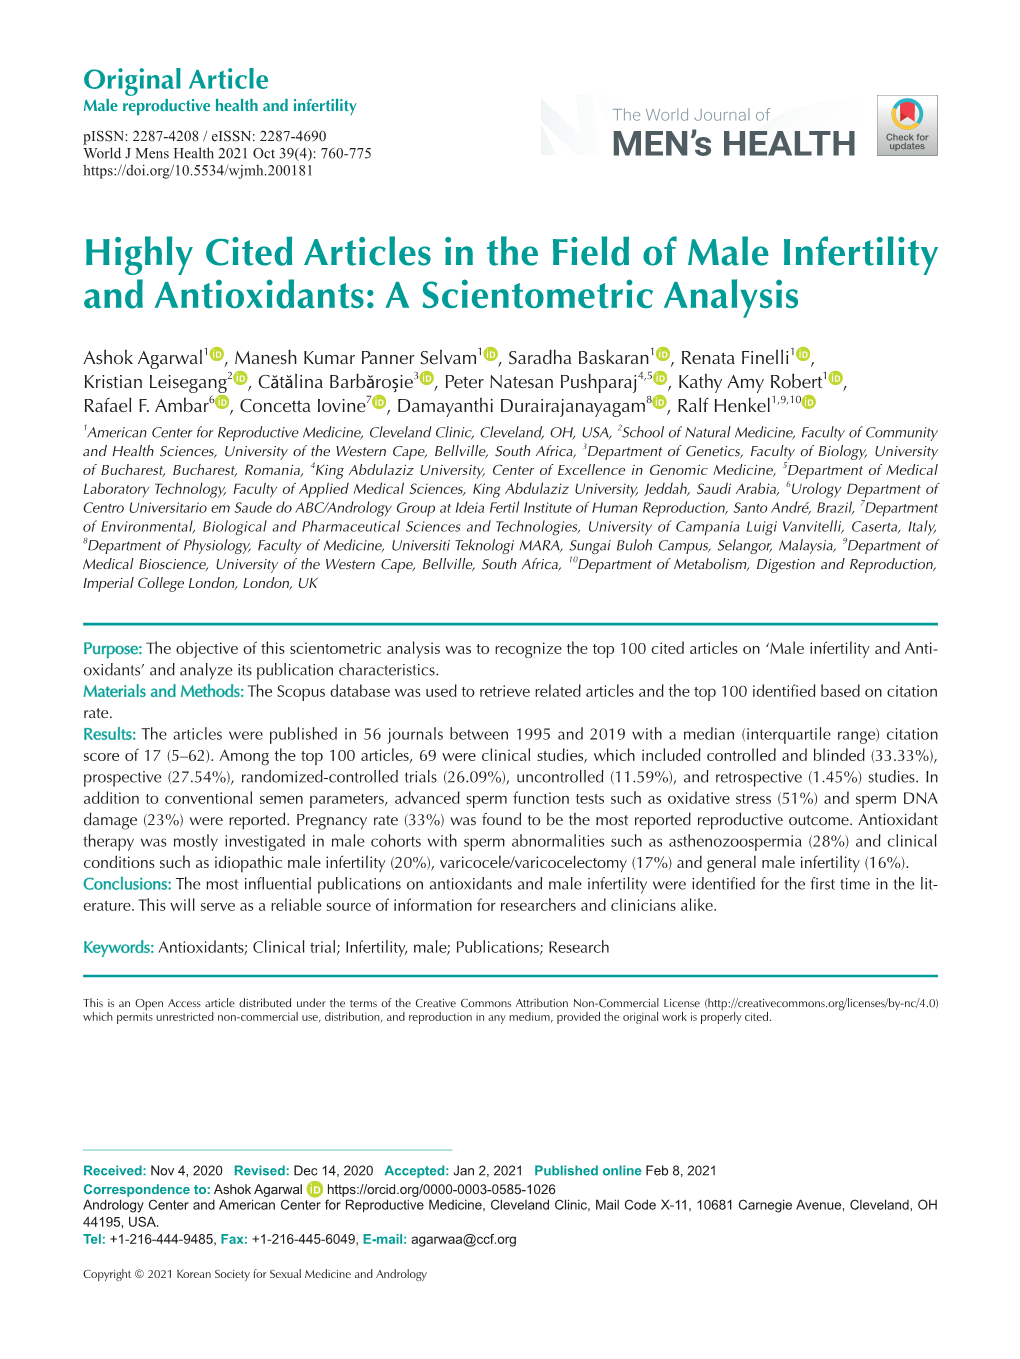 Highly Cited Articles in the Field of Male Infertility and Antioxidants: a Scientometric Analysis